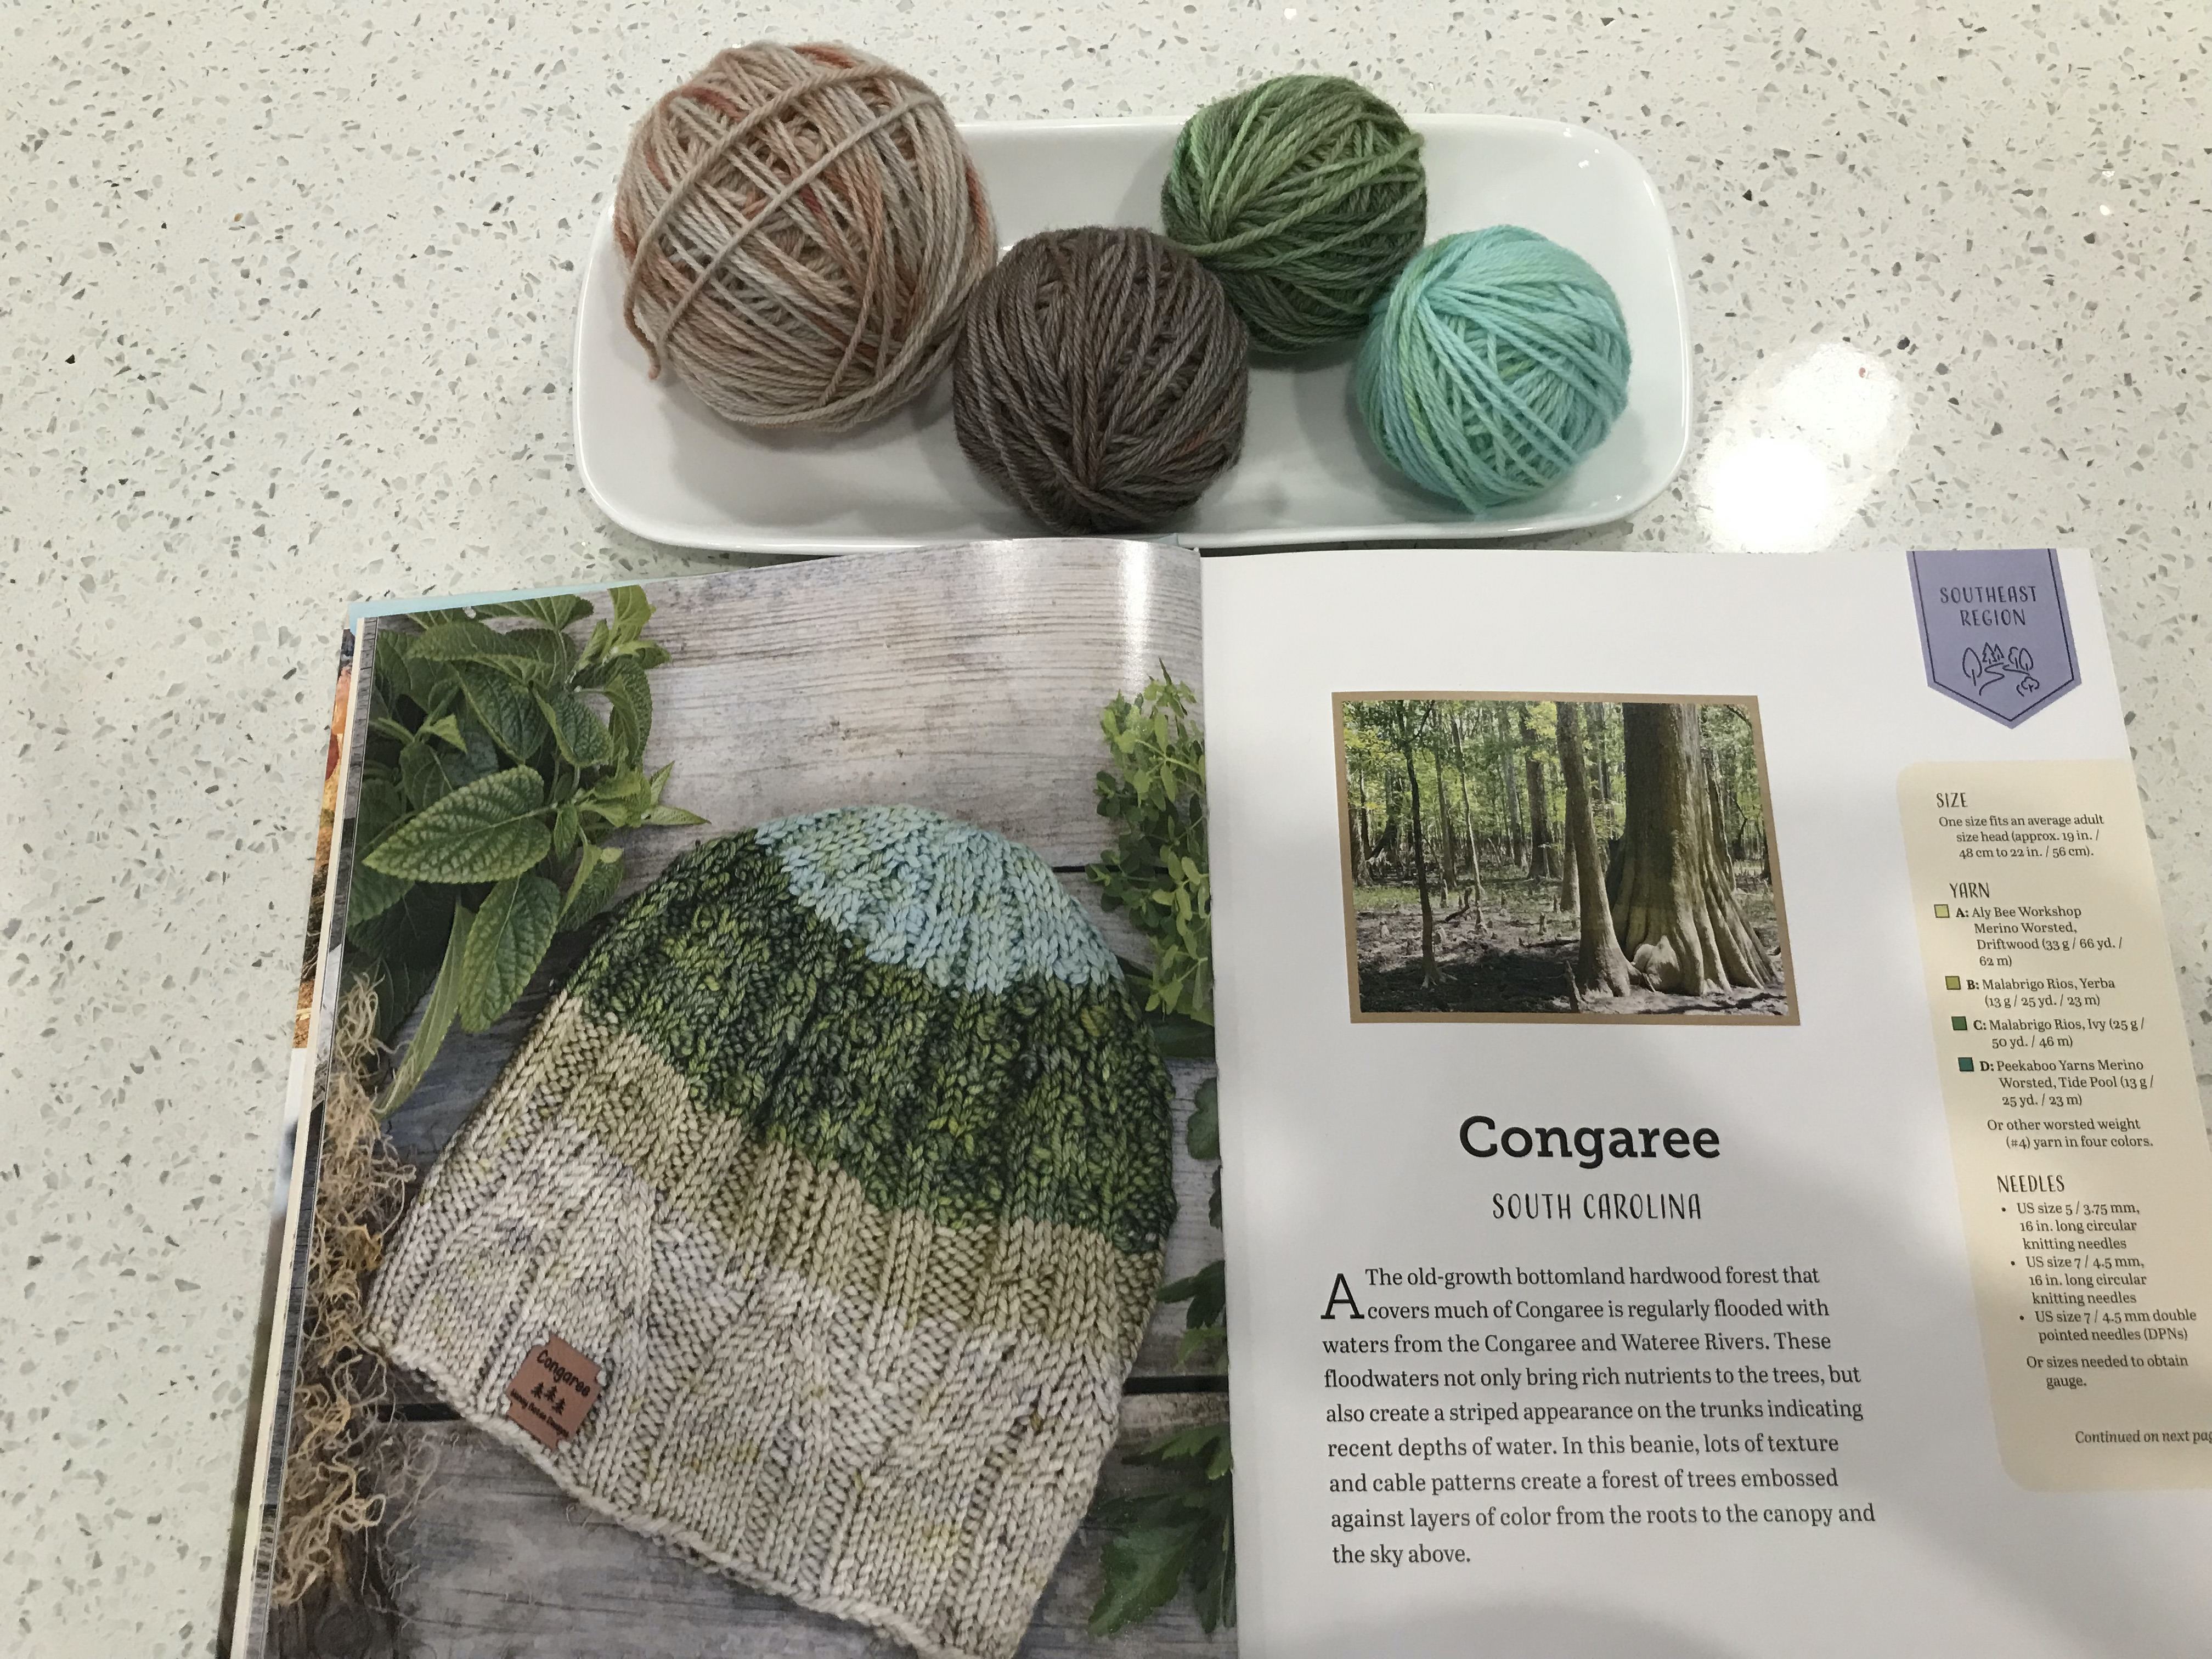 Knitting the National Parks by Nancy Bates - Around the Table Yarns